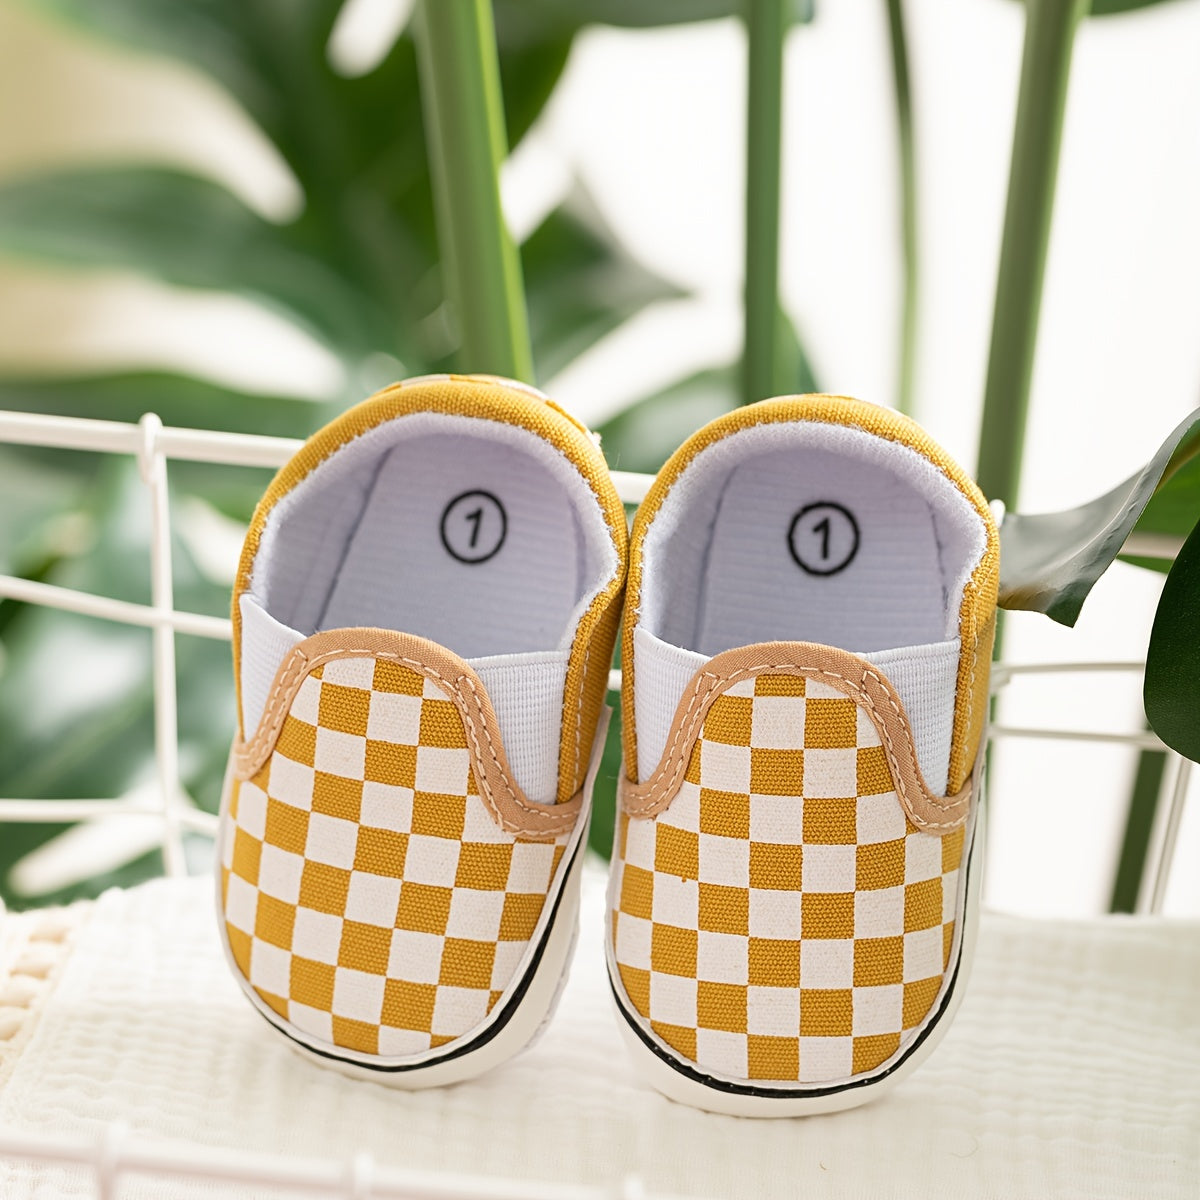 Toddler Baby Sneakers Soft Sole Non-slip Checkerboard Canvas Shoes First Walkers Crib Shoes Girls And Boys